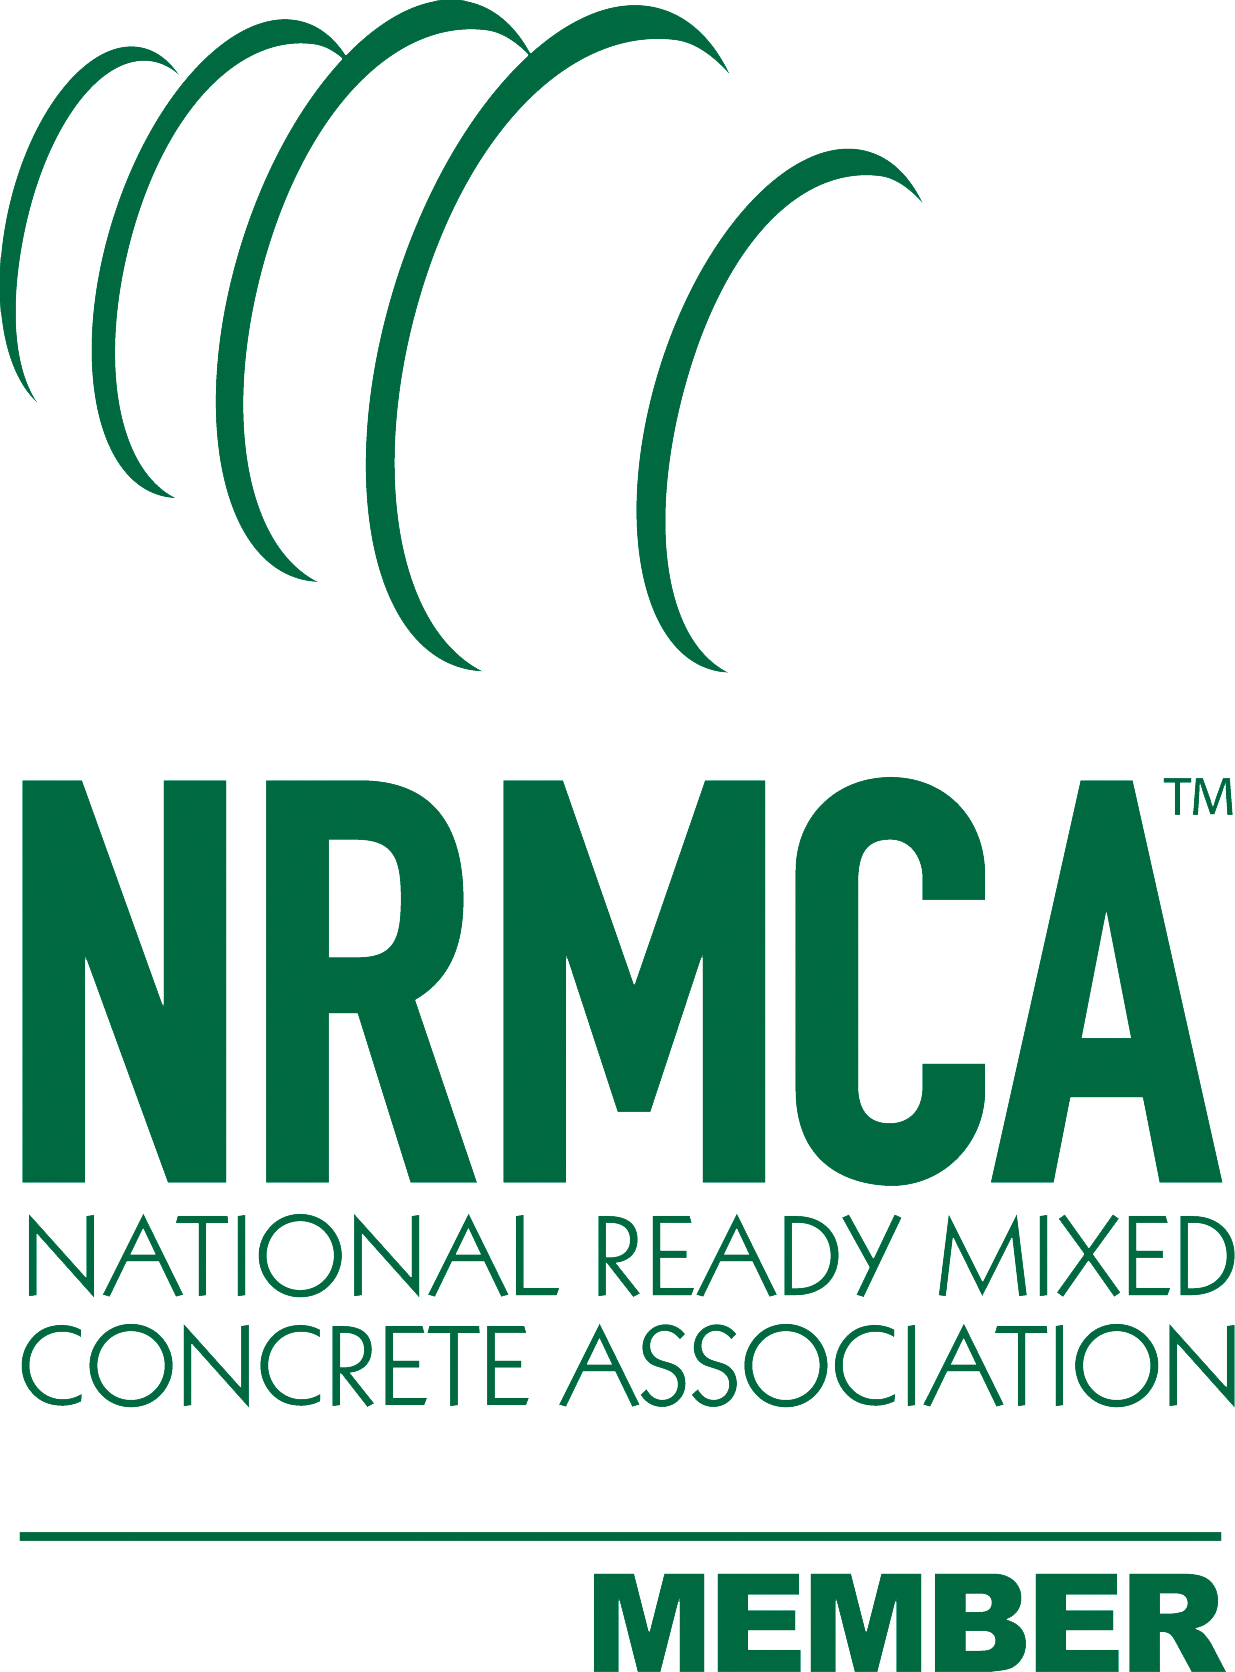 NRMCA is in tall block letters with 